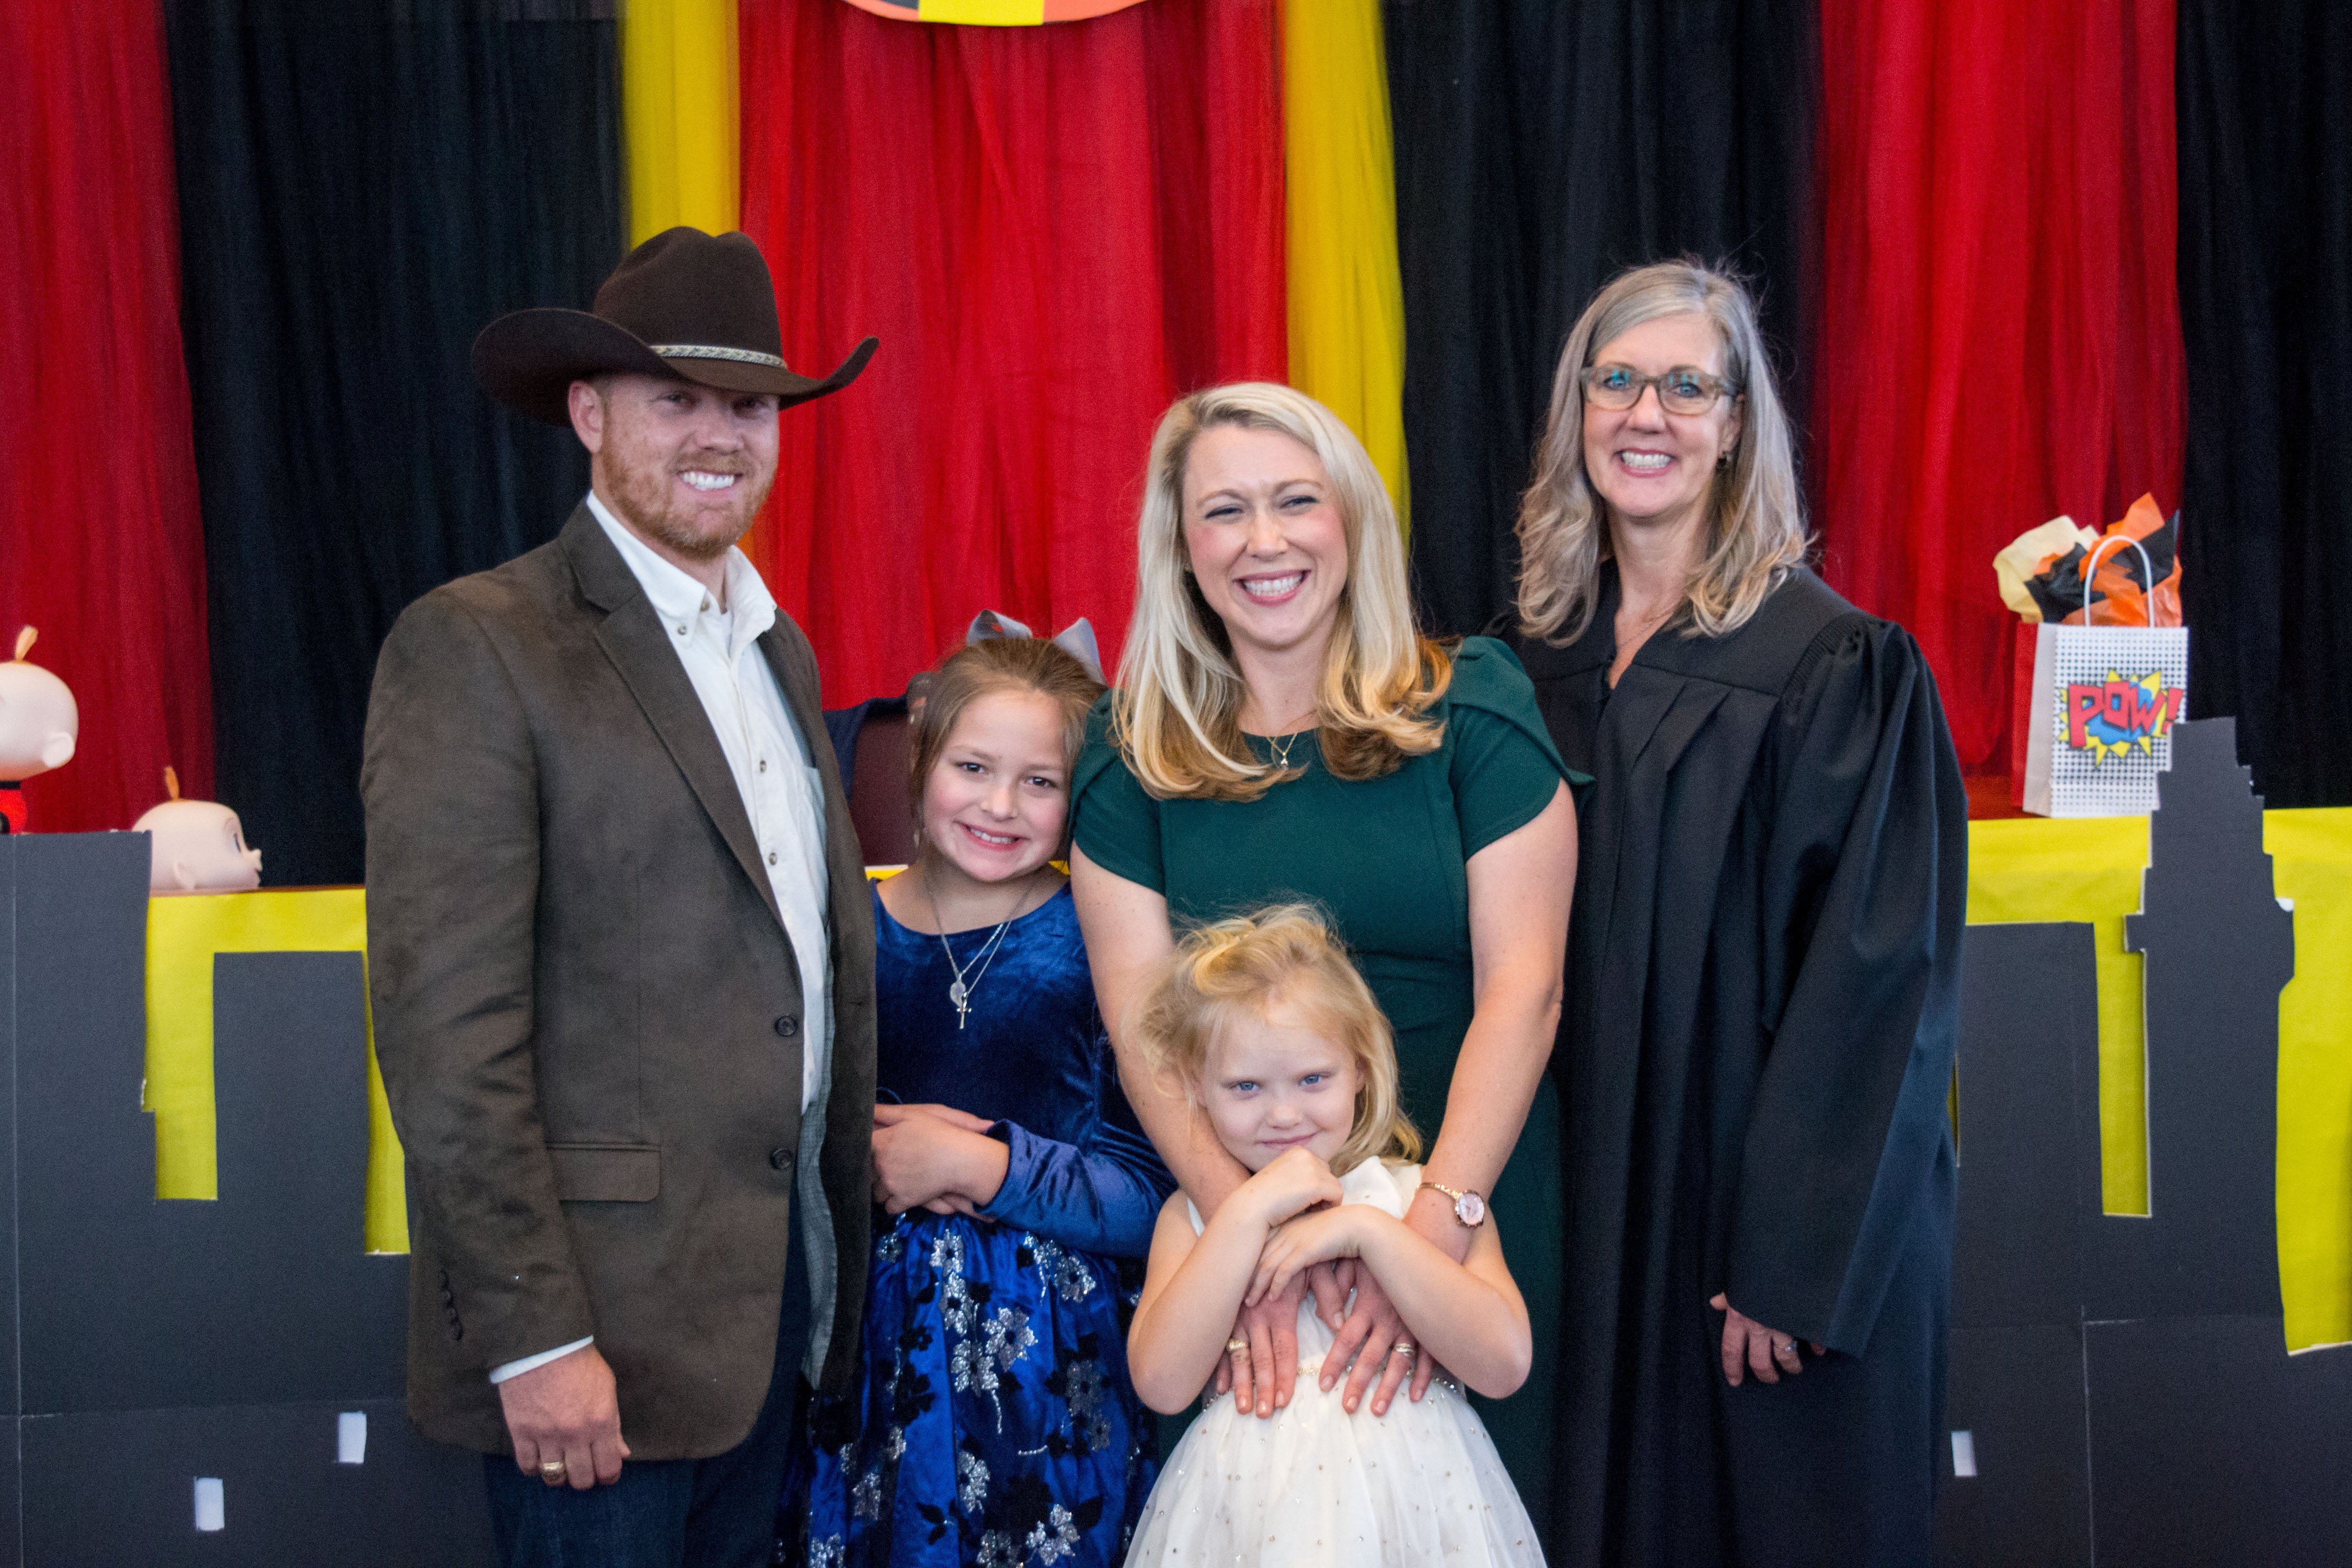 The Hon. Nikki Mundkowsky, associate judge of the Centex Child Protection Court North in Waco, celebrates with Karen and Kyle Melton and their family following the adoption of the Meltons' 10-year-old daughter.